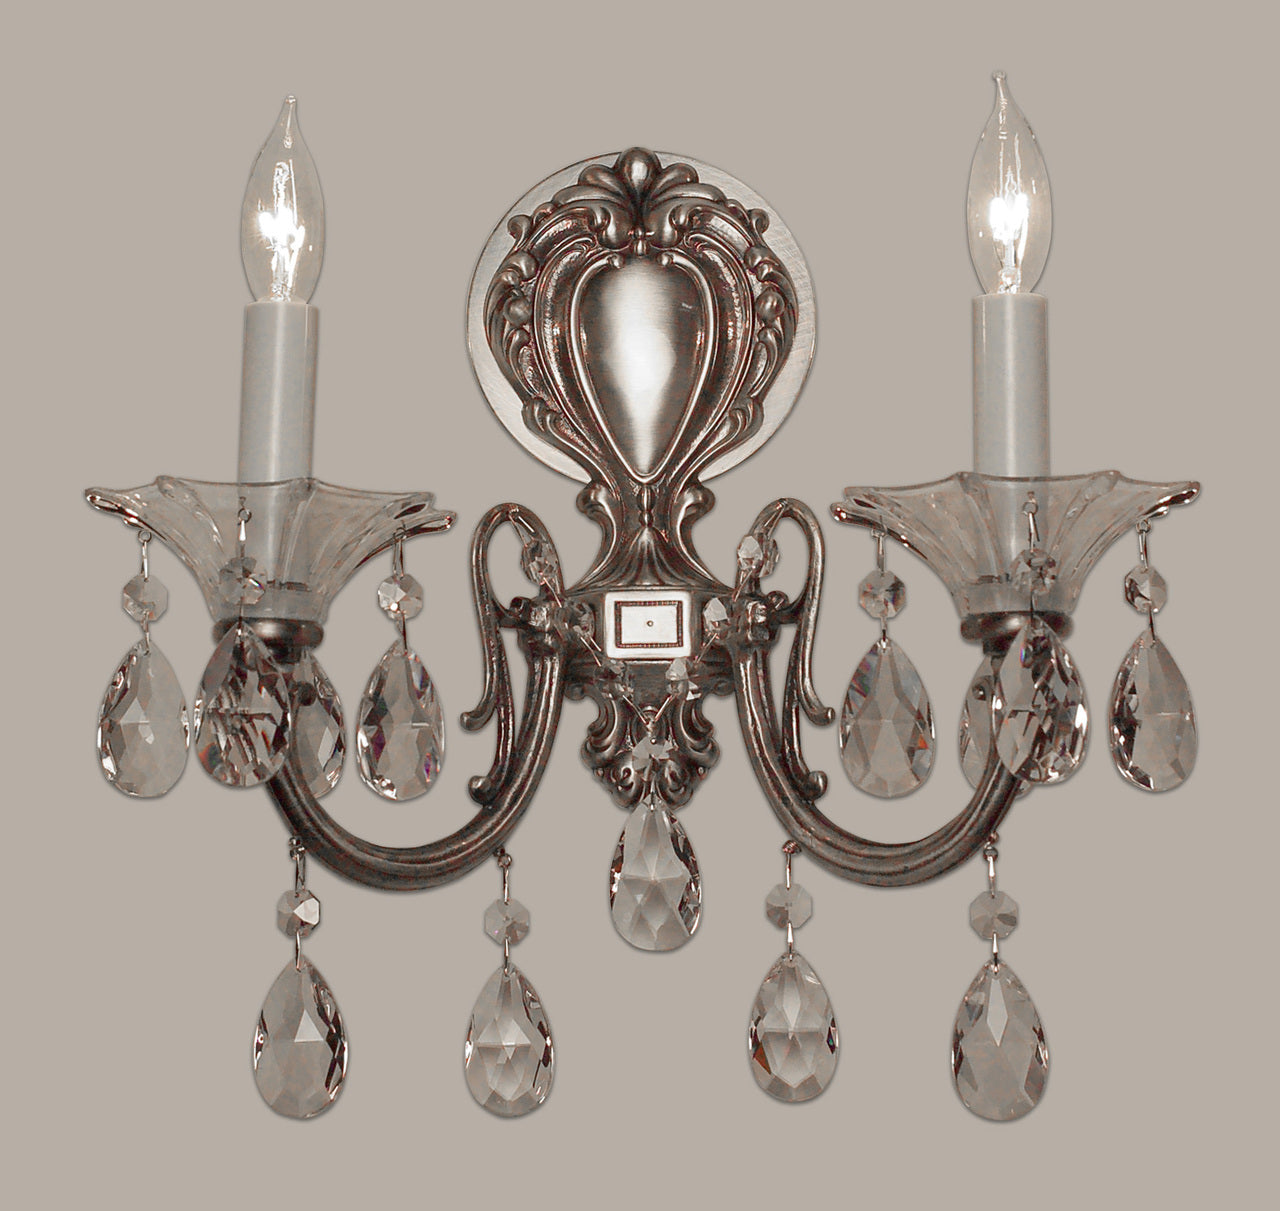 Classic Lighting 57052 RB CGT Via Lombardi Crystal Wall Sconce in Roman Bronze (Imported from Spain)